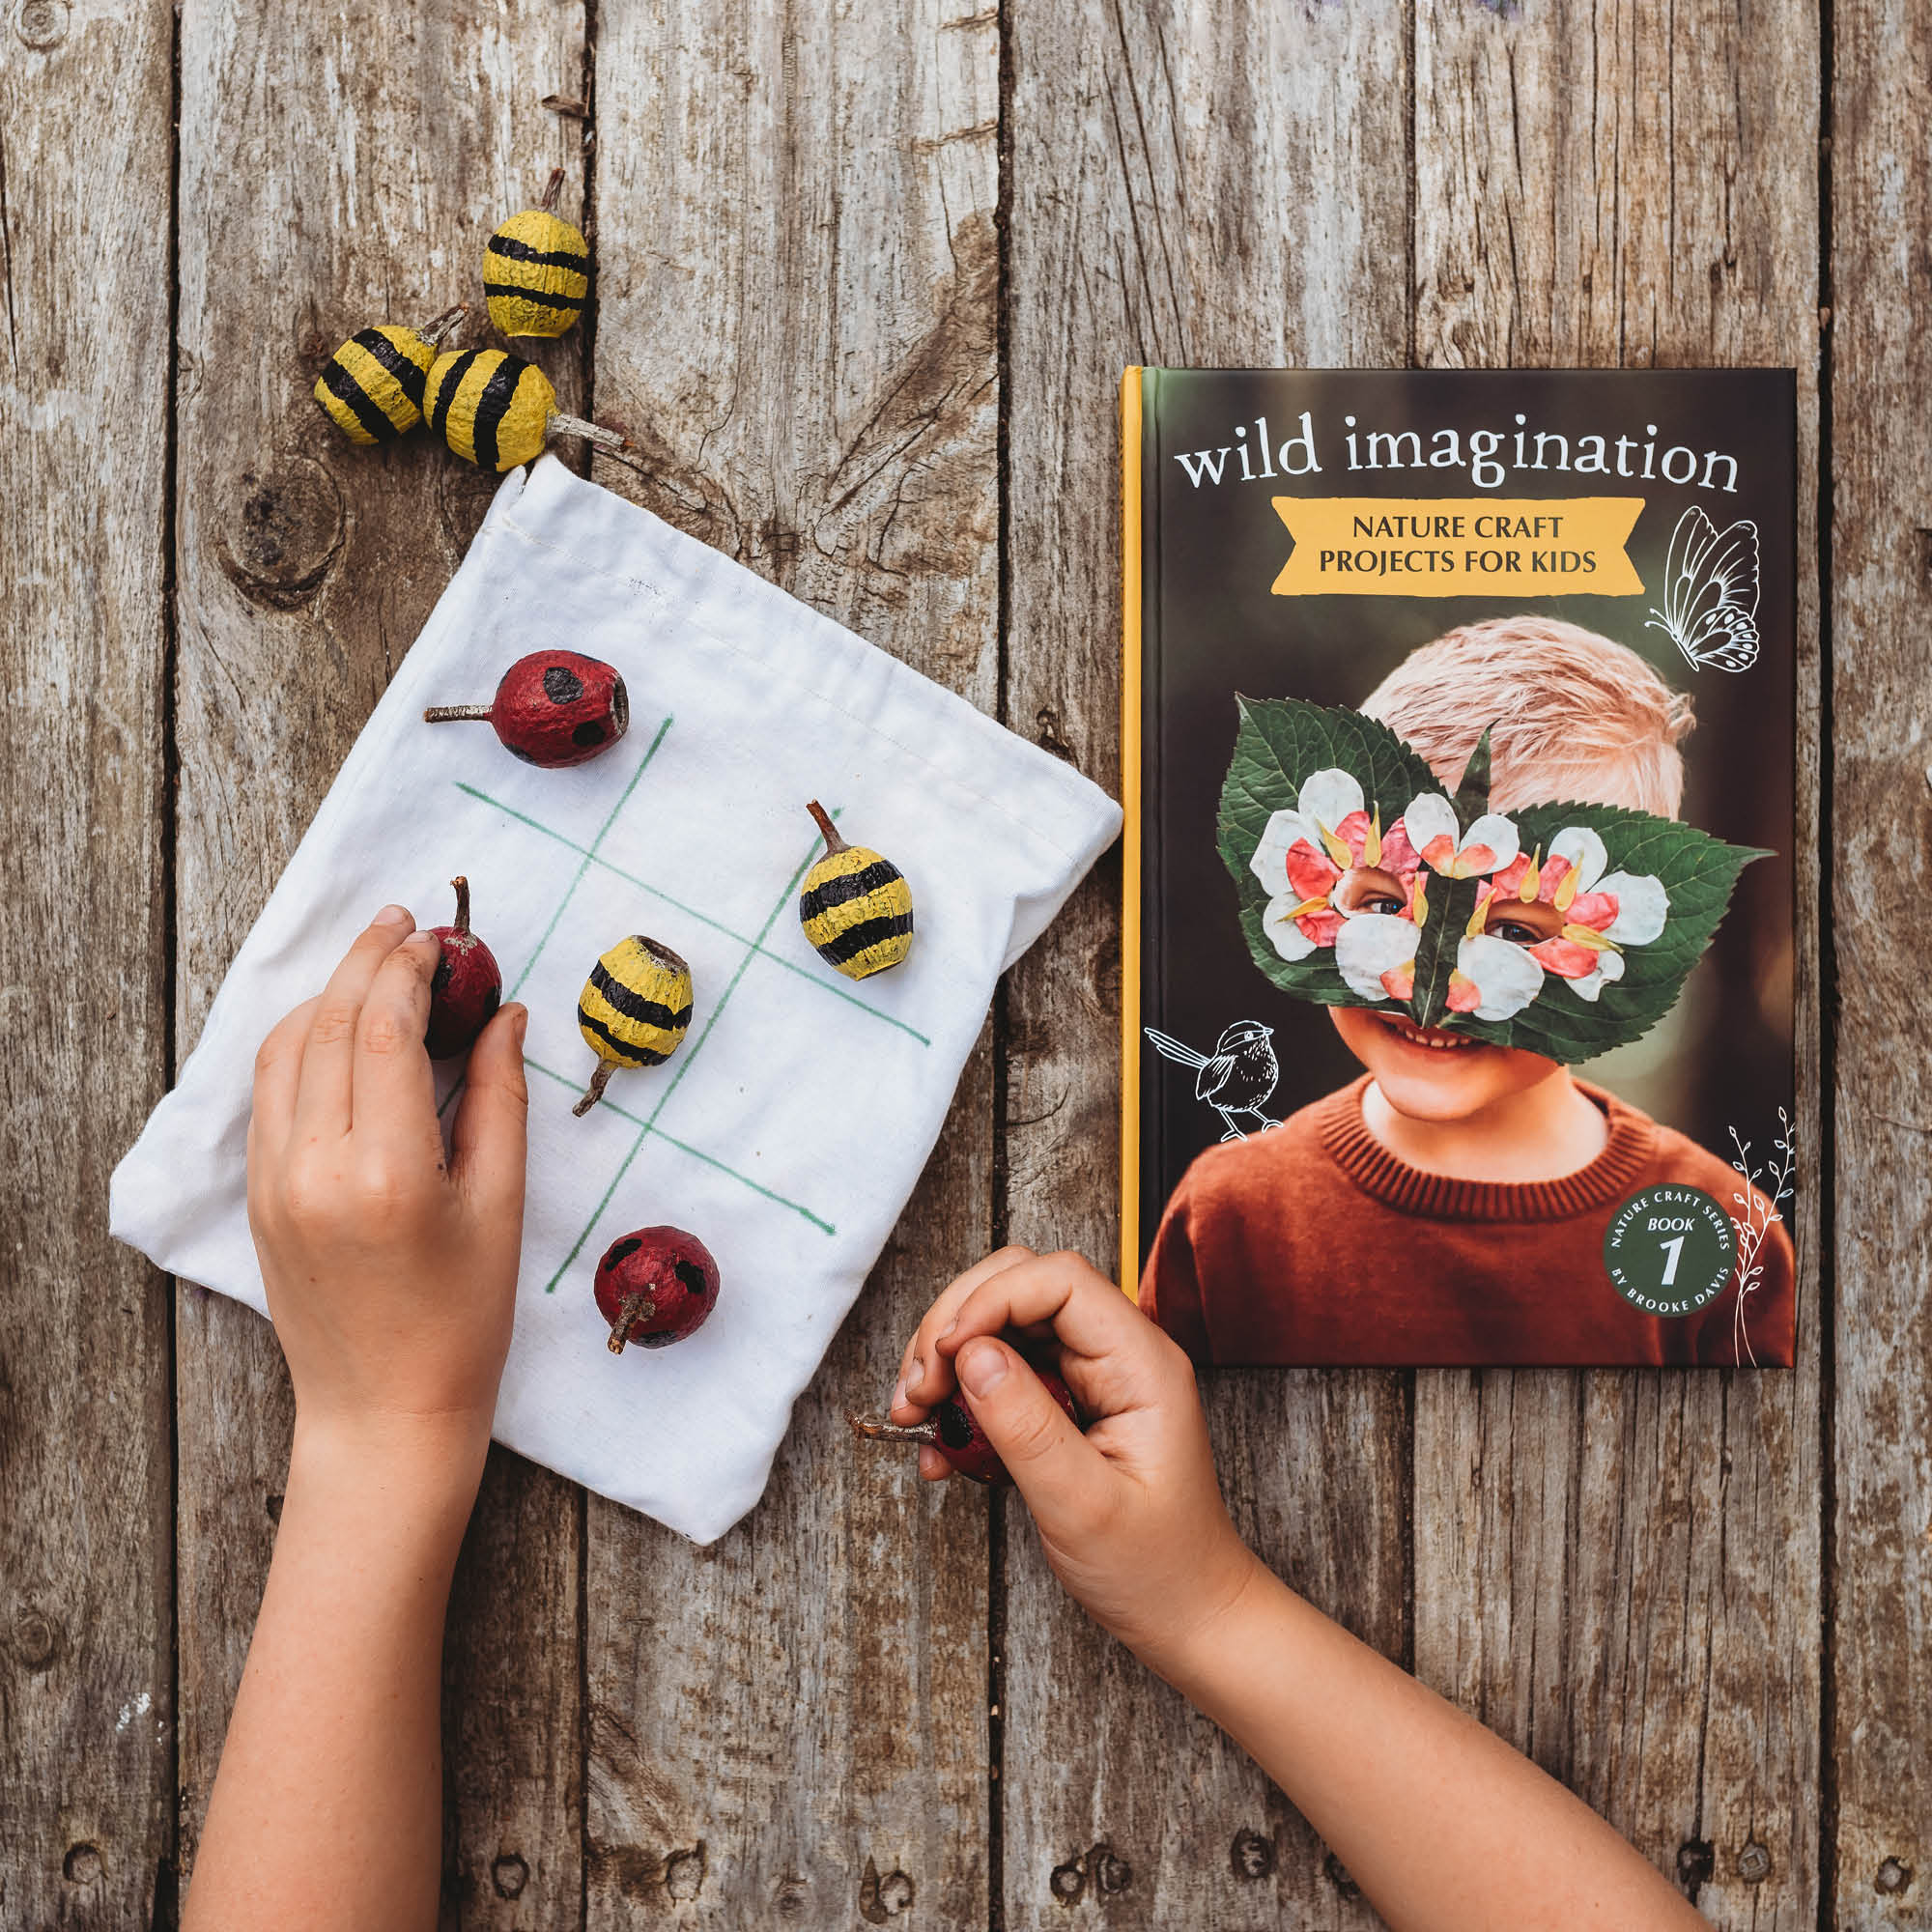 Tic tac toe activity using gum nuts painted as ladybirds and bees from Wild Imagination, nature craft projects for kids book, made in Australia by Your Wild Books. 